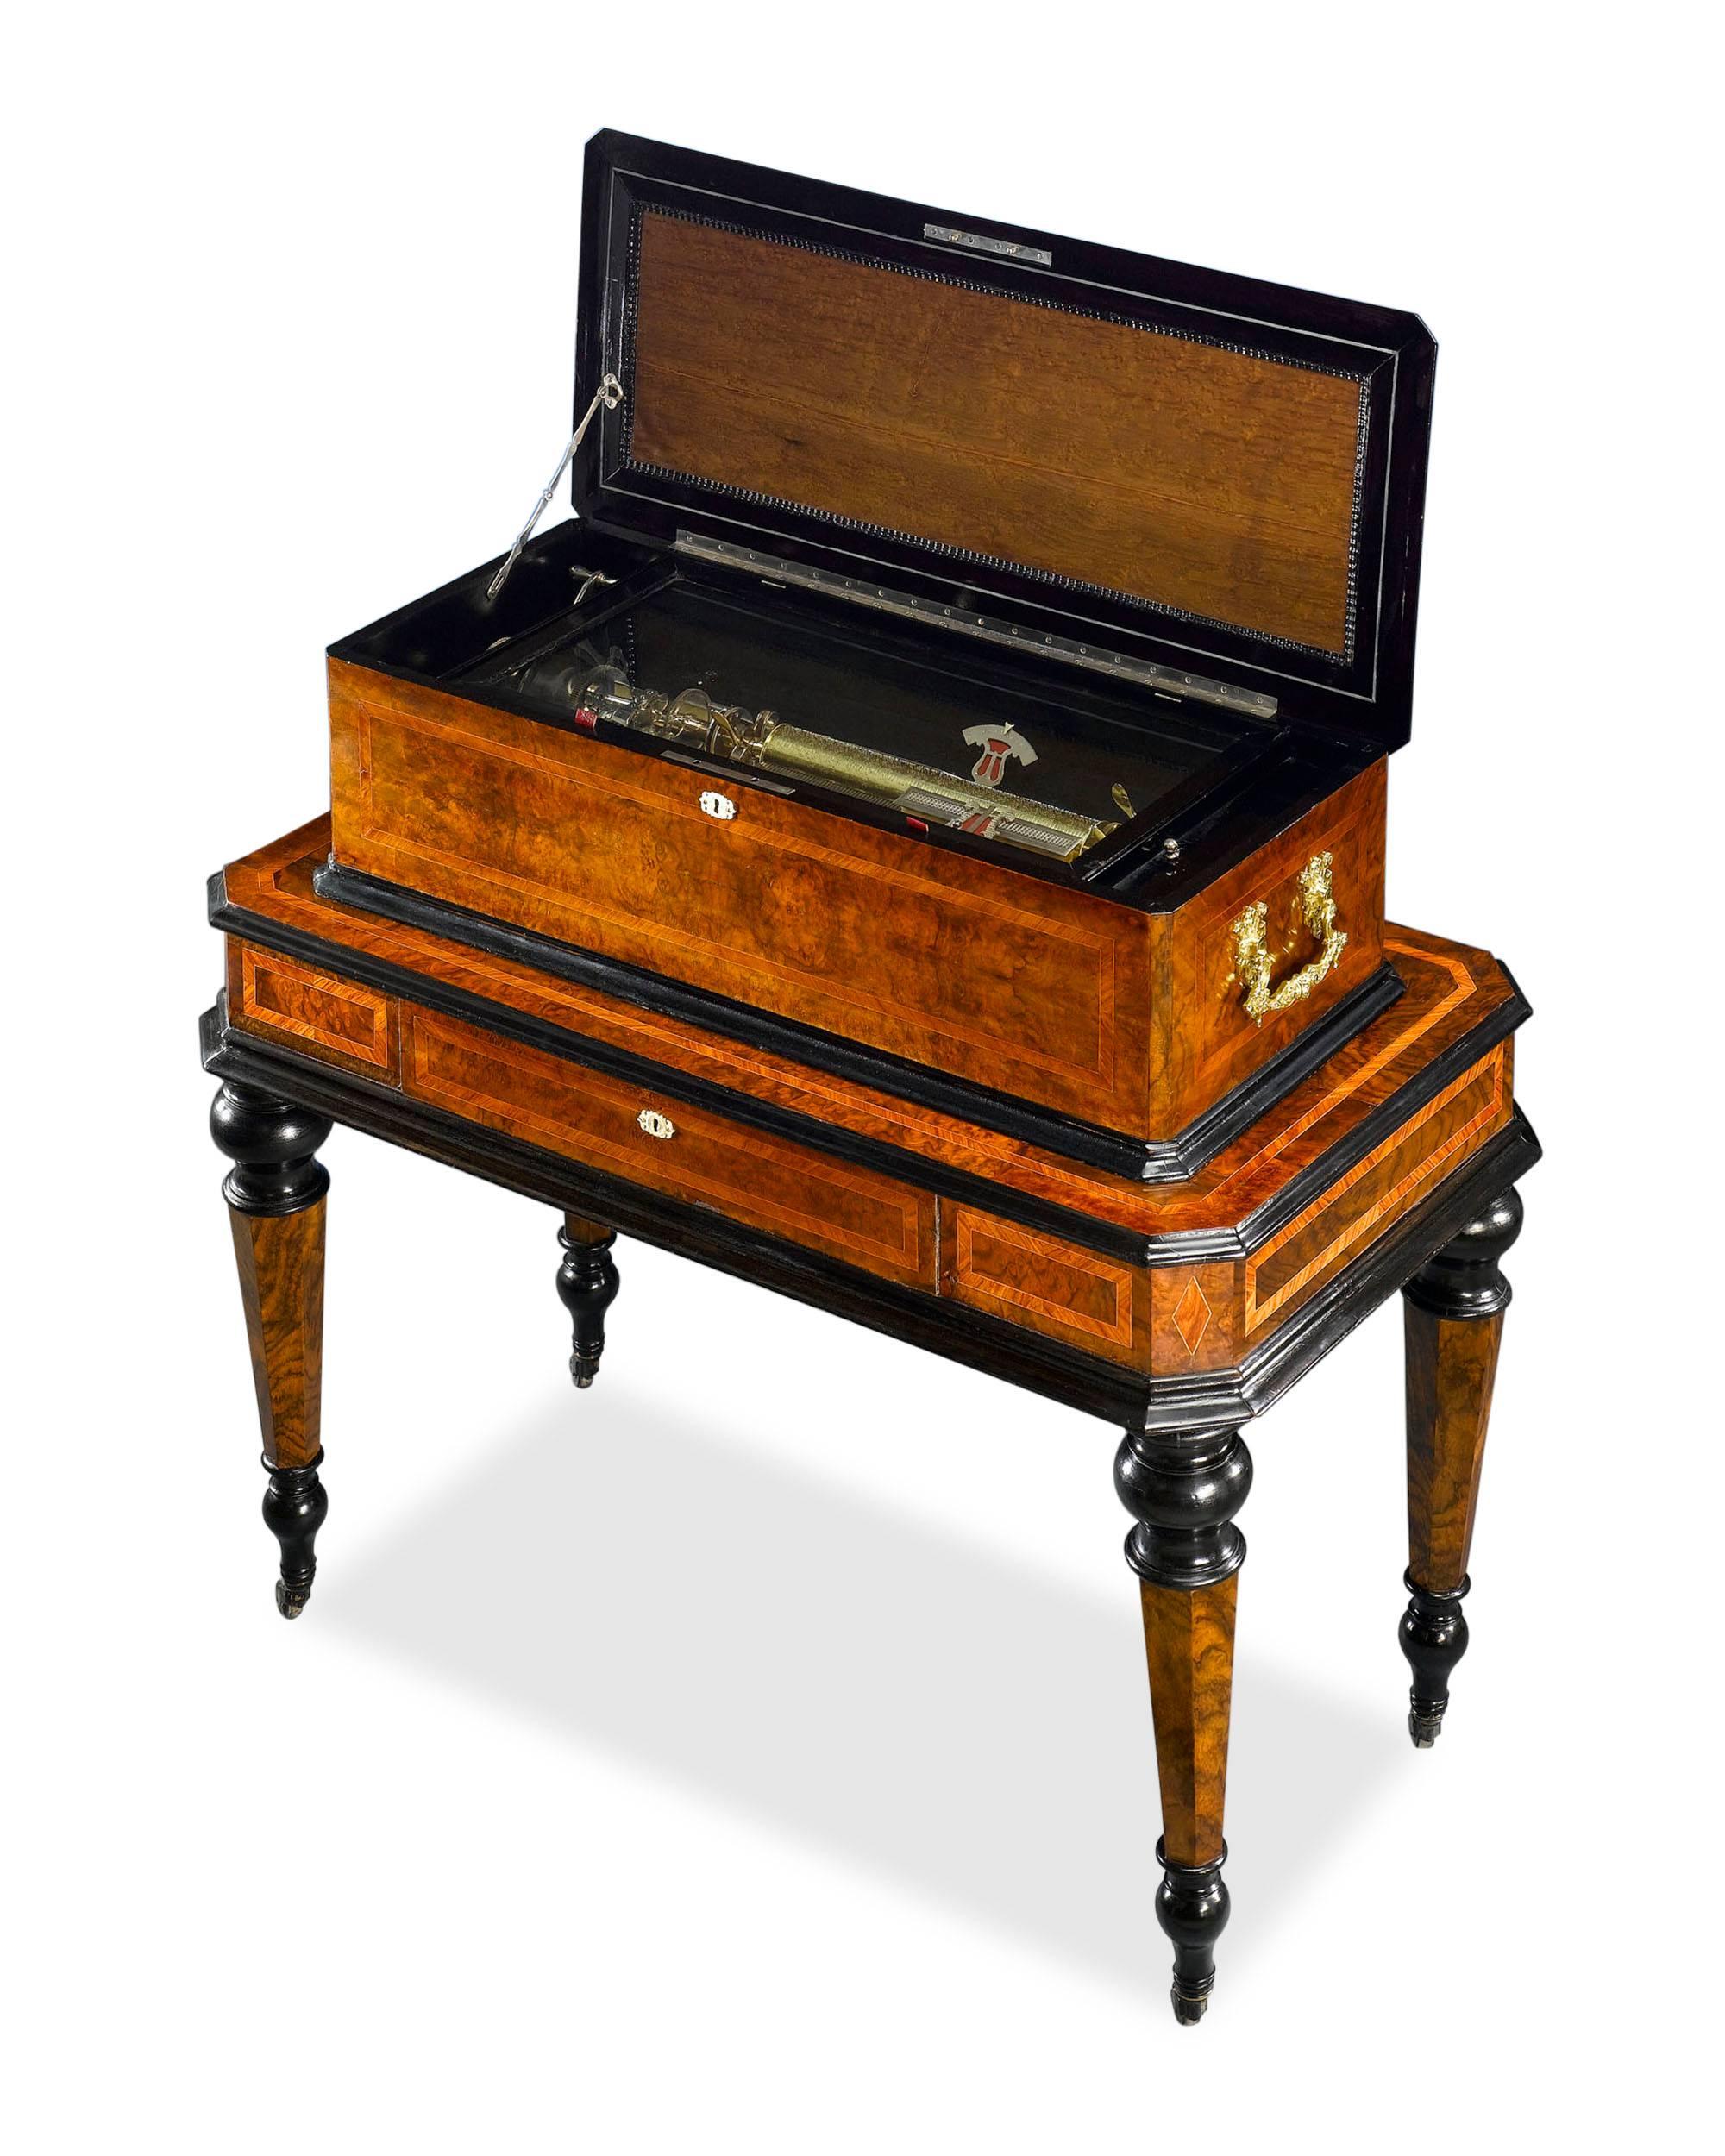 This captivating and exceptionally engineered Swiss interchangable cylinder music box is accompanied by its original table. The mechanism is set in a beautiful case of burled and ebonized walnut with satinwood, brass and mother-of-pearl inlays